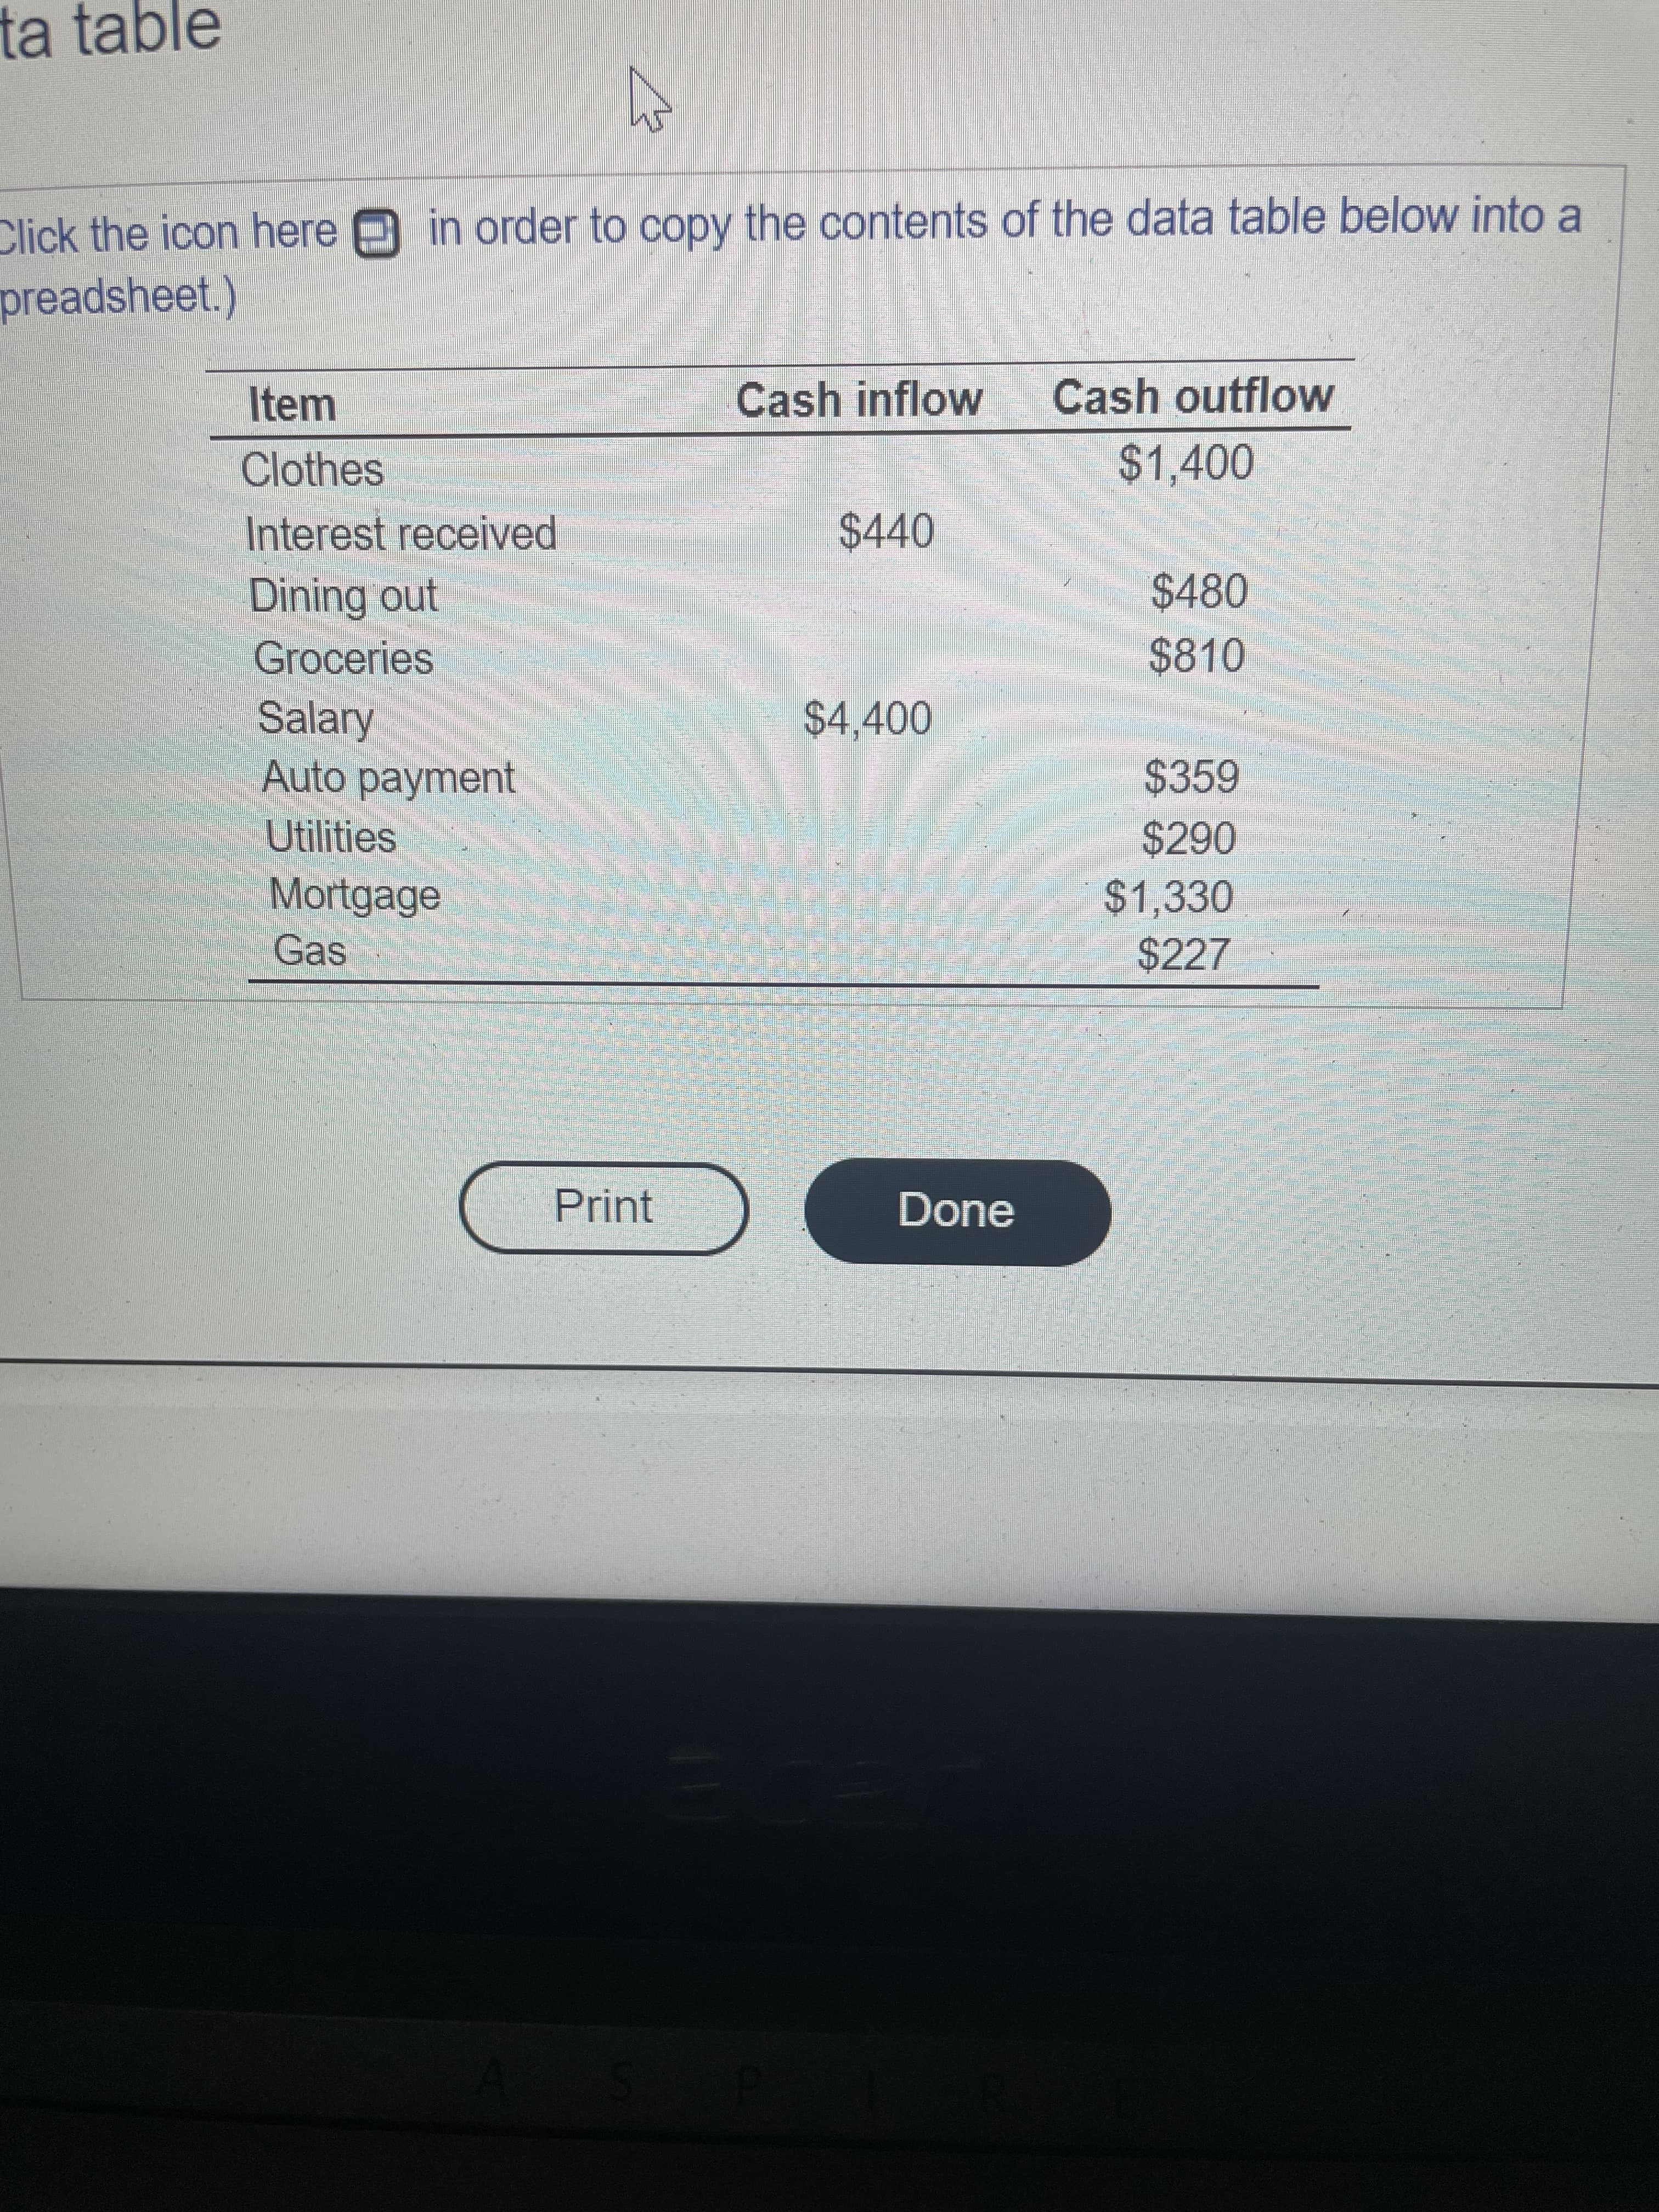 ta table
Click the icon here A in order to copy the contents of the data table below into a
preadsheet.)
Item
Cash inflow
Cash outflow
帘
Clothes
$1,400
Interest received
$440
Dining out
$480
Groceries
$810
$4,400
Salary
Auto payment
$359
Utilities
067$
$1,330
Mortgage
Gas
$227
Print
Done
